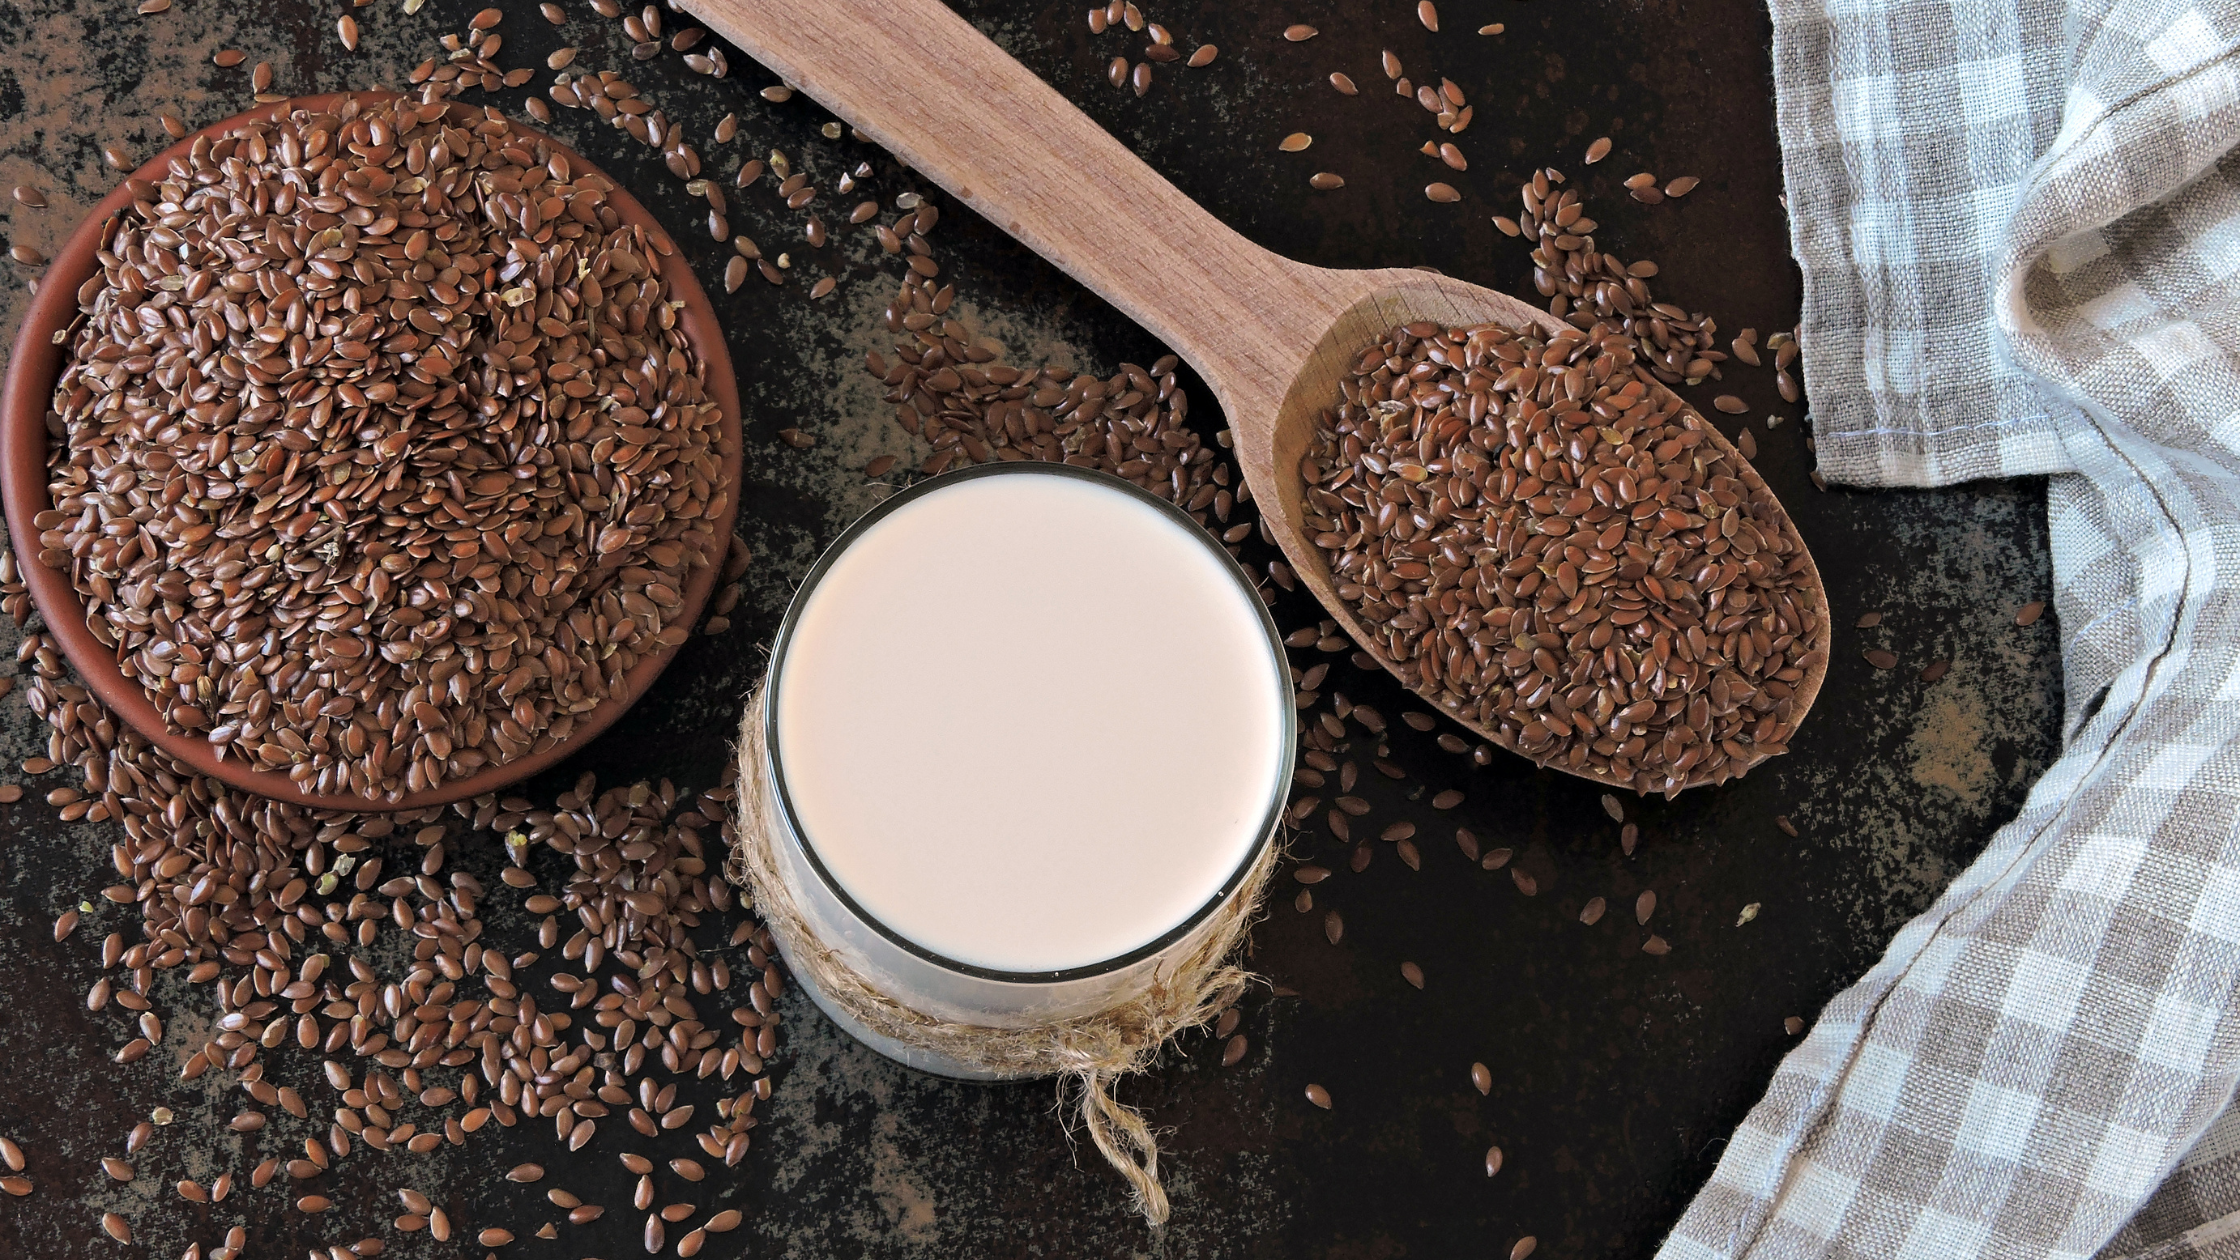 flaxseed milk is known for its omega-3 acids